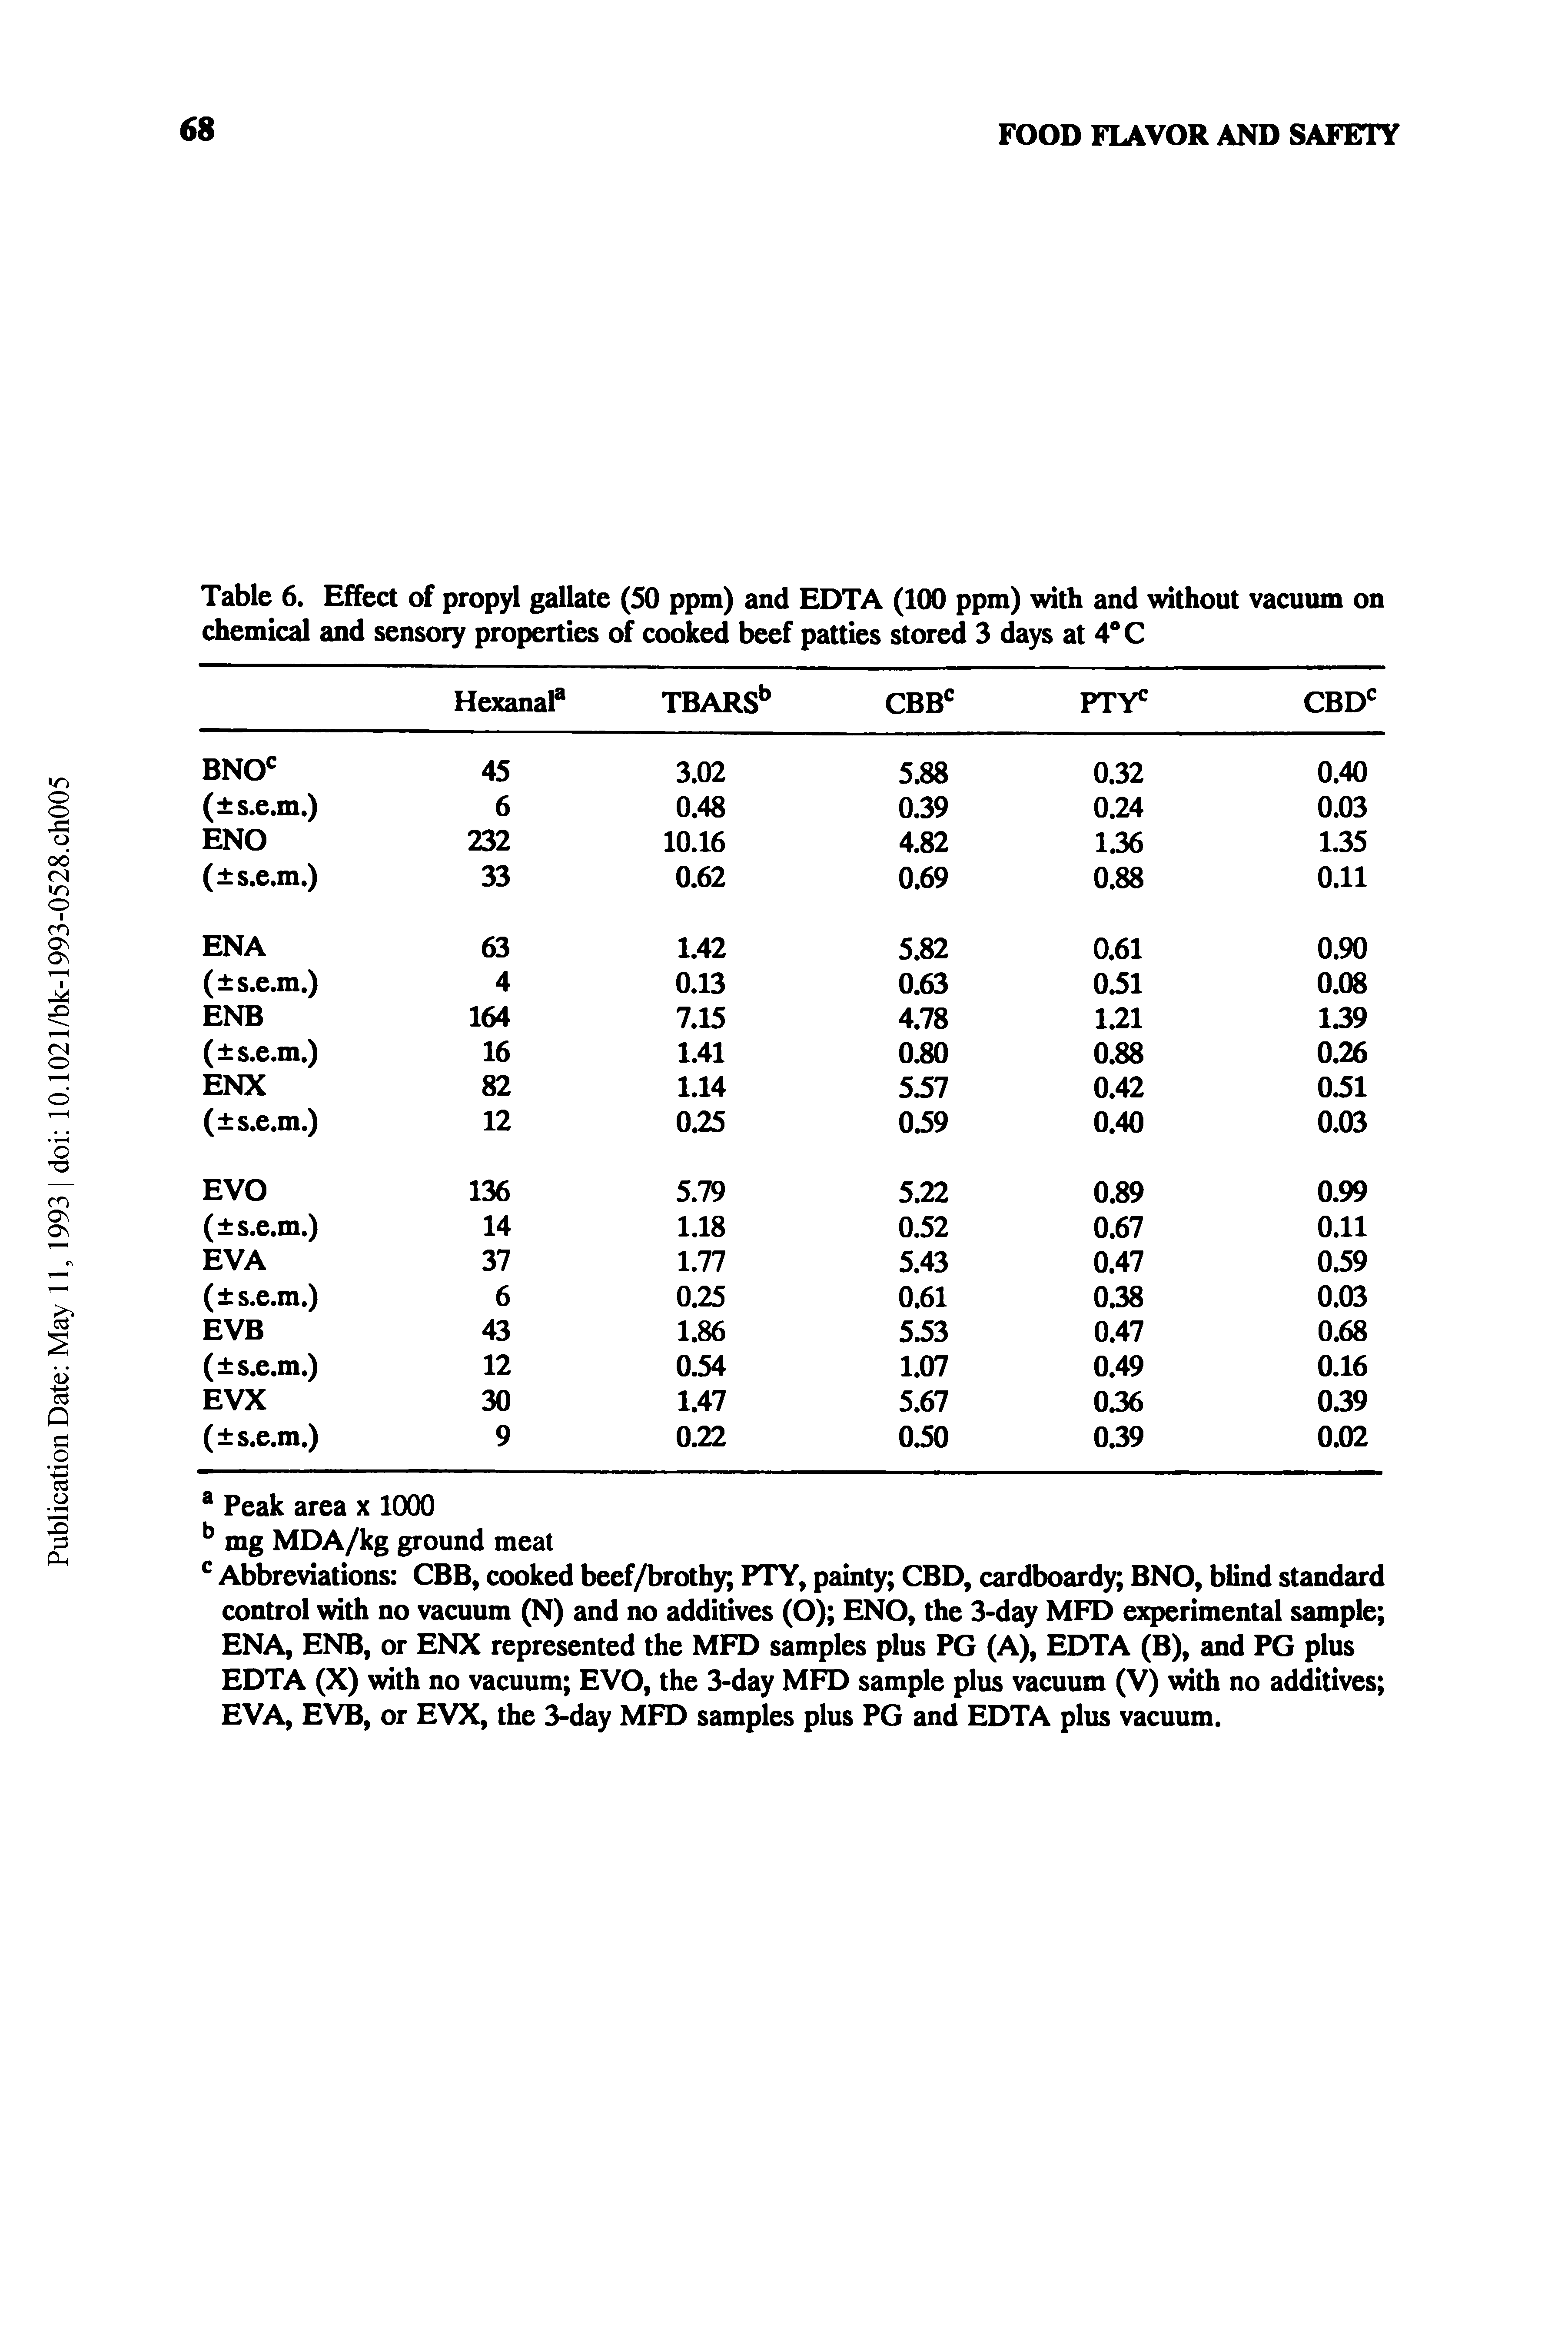 Table 6. Effect of propyl gallate (50 ppm) and EDTA (100 ppm) with and without vacuum on chemical and sensory properties of cooked beef patties stored 3 days at 4 C...